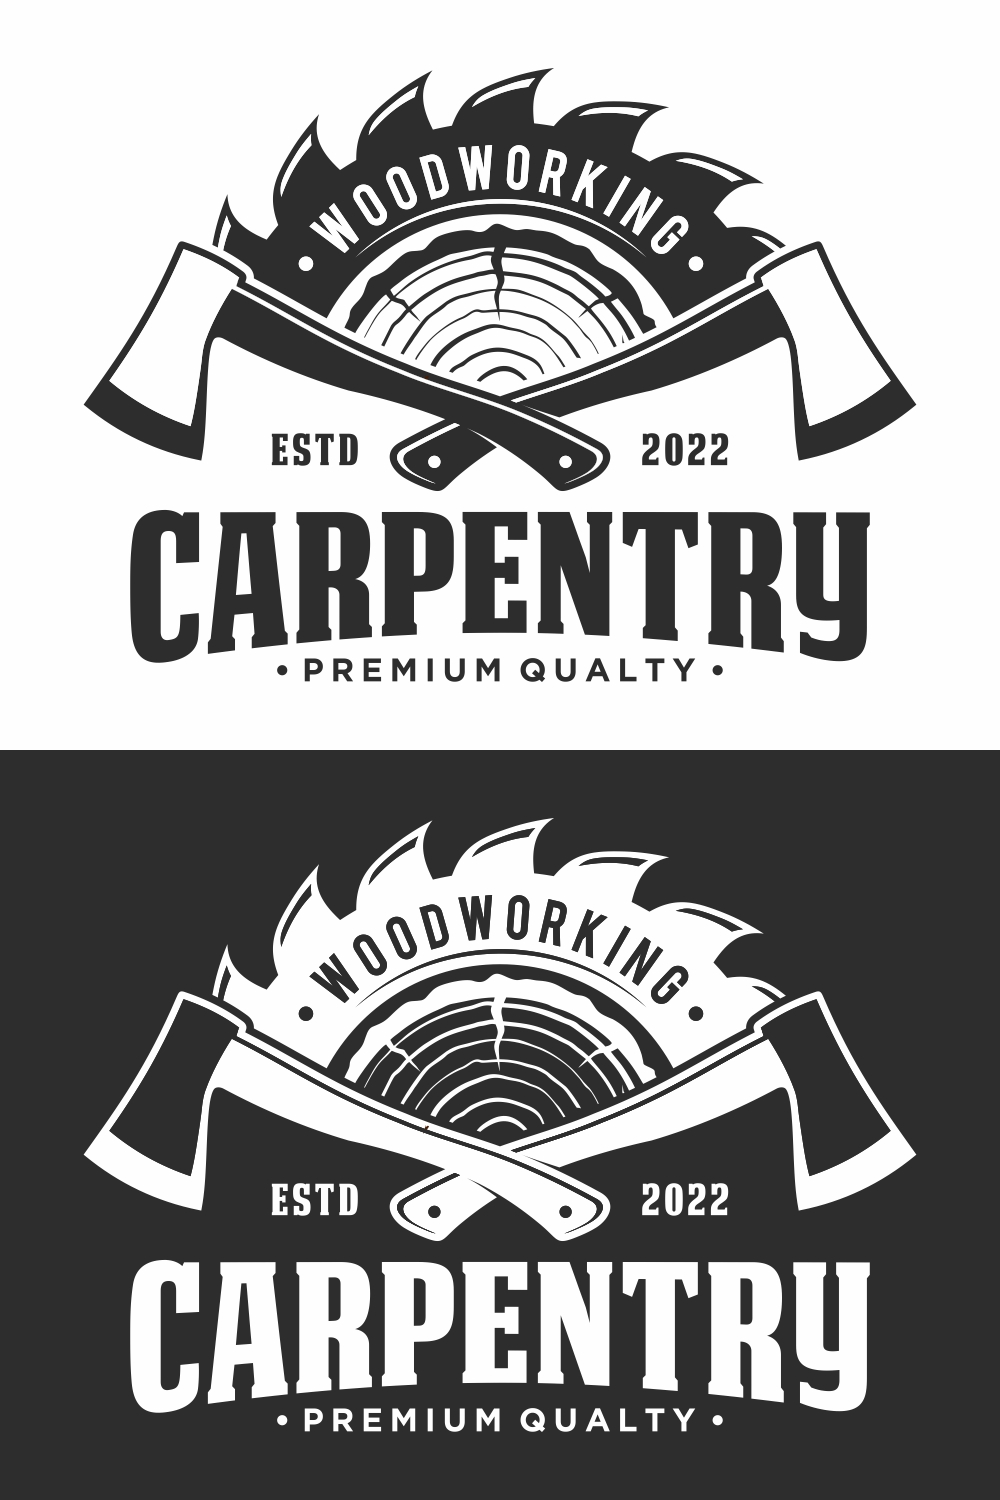 woodcutter logo design, badge, label or logo in vintage style – Only $6 pinterest preview image.